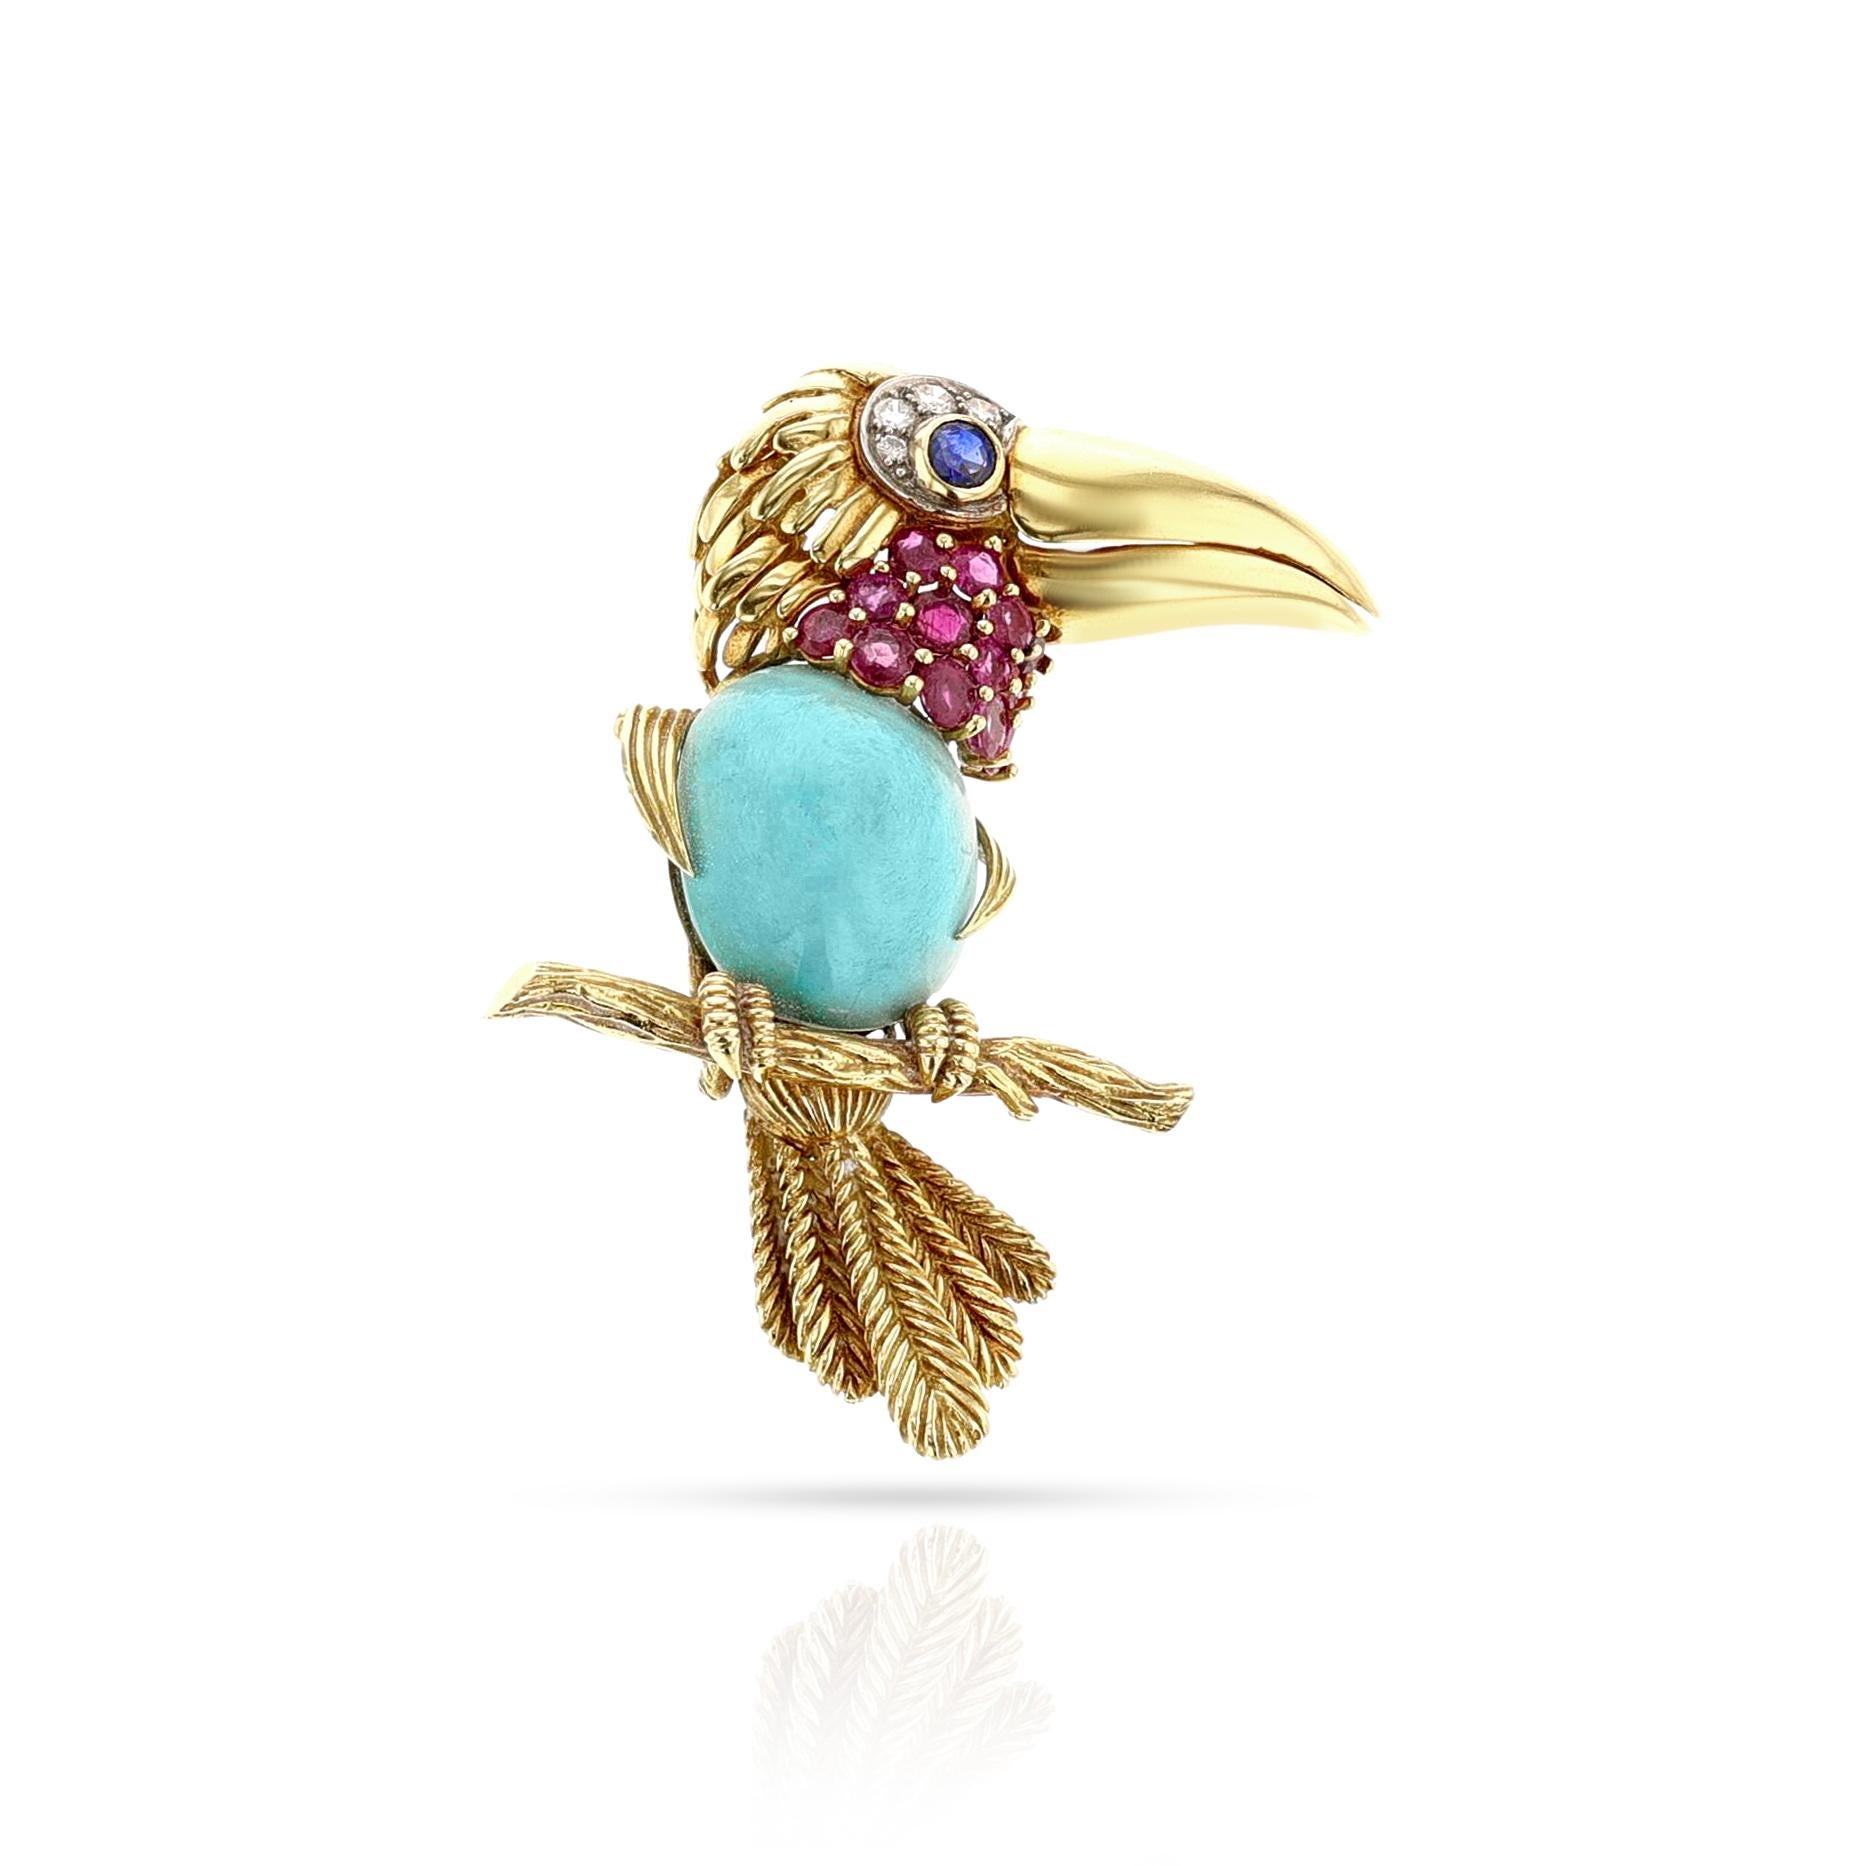 A Cartier Gold, Platinum, Turquoise, Ruby, Sapphire and Diamond Toucan Brooch, crafted by skilled artisans in France with 18k gold and adorned with a beautiful oval cabochon turquoise measuring 18 x 16 MM. The toucan's eye is a stunning sapphire